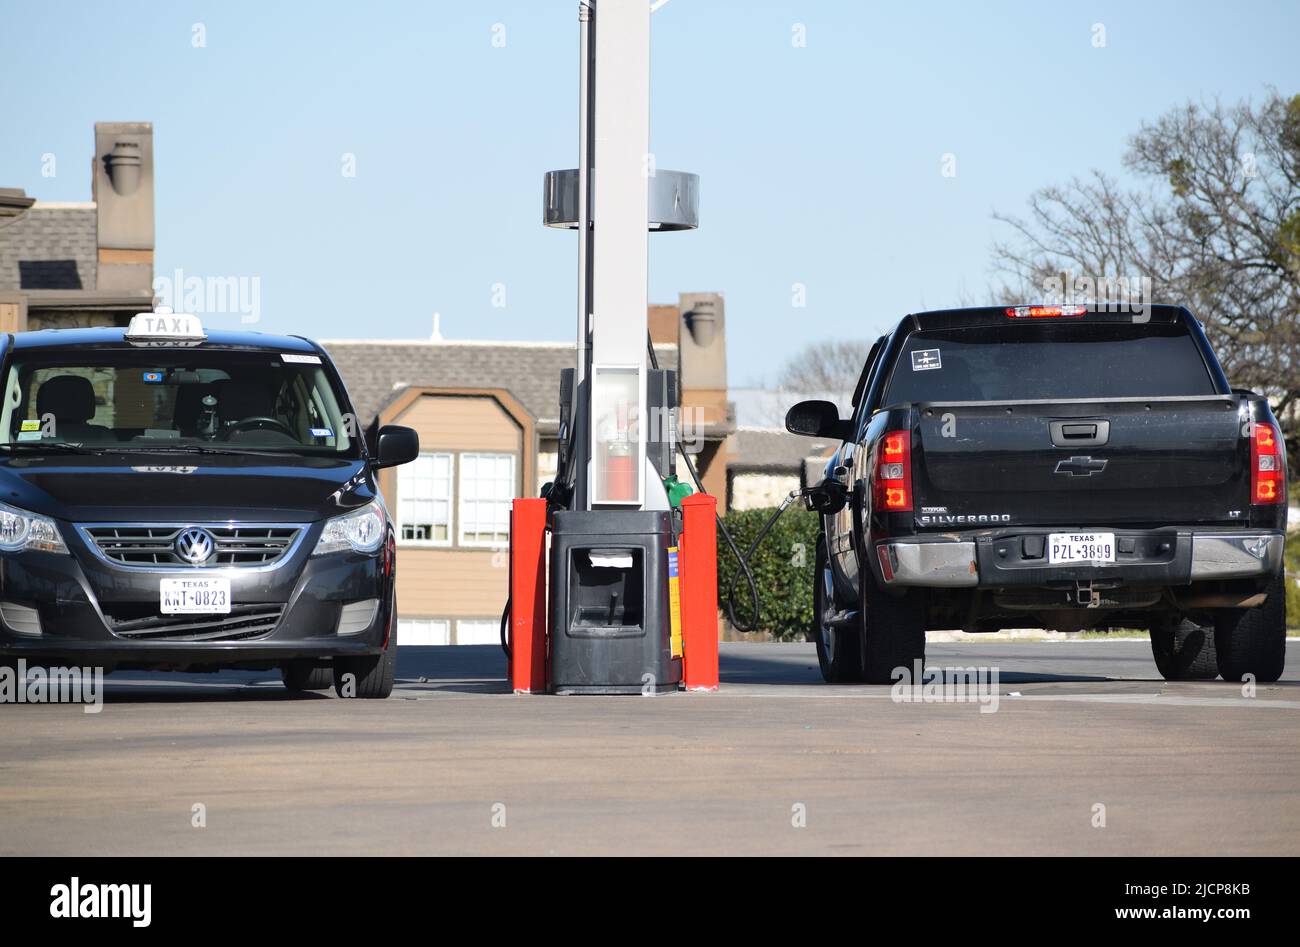 A black Chevrolet Silverado with a 'come and take it' stick in its back window, parked at a gas pump Stock Photo